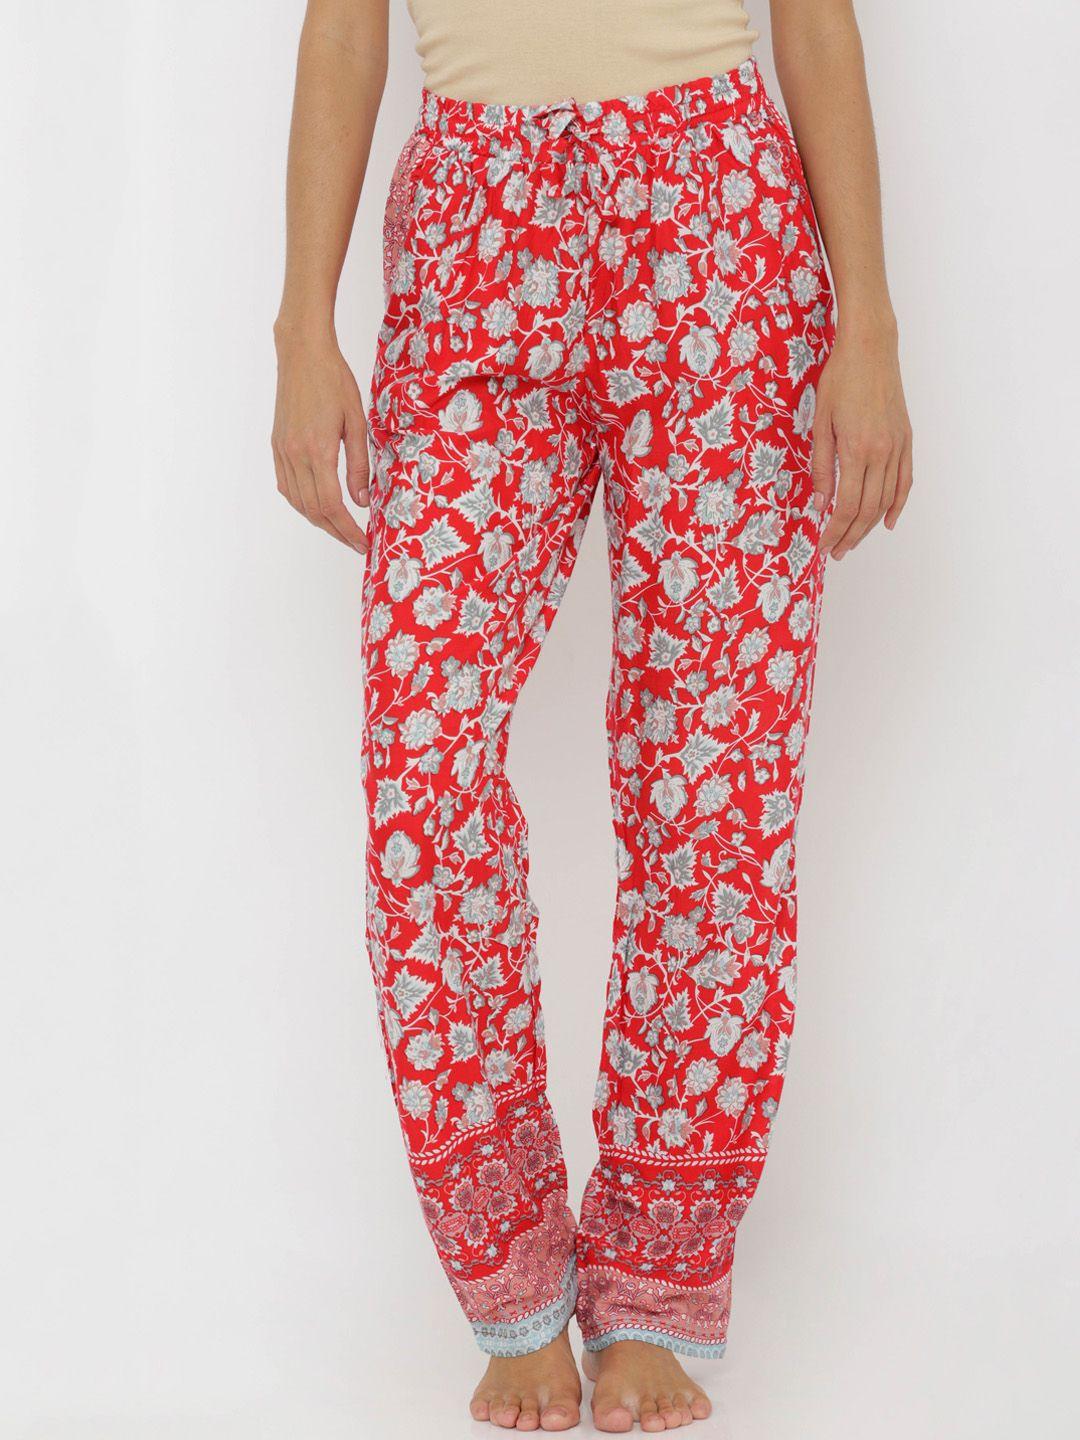 candour london women red & white printed lounge pants